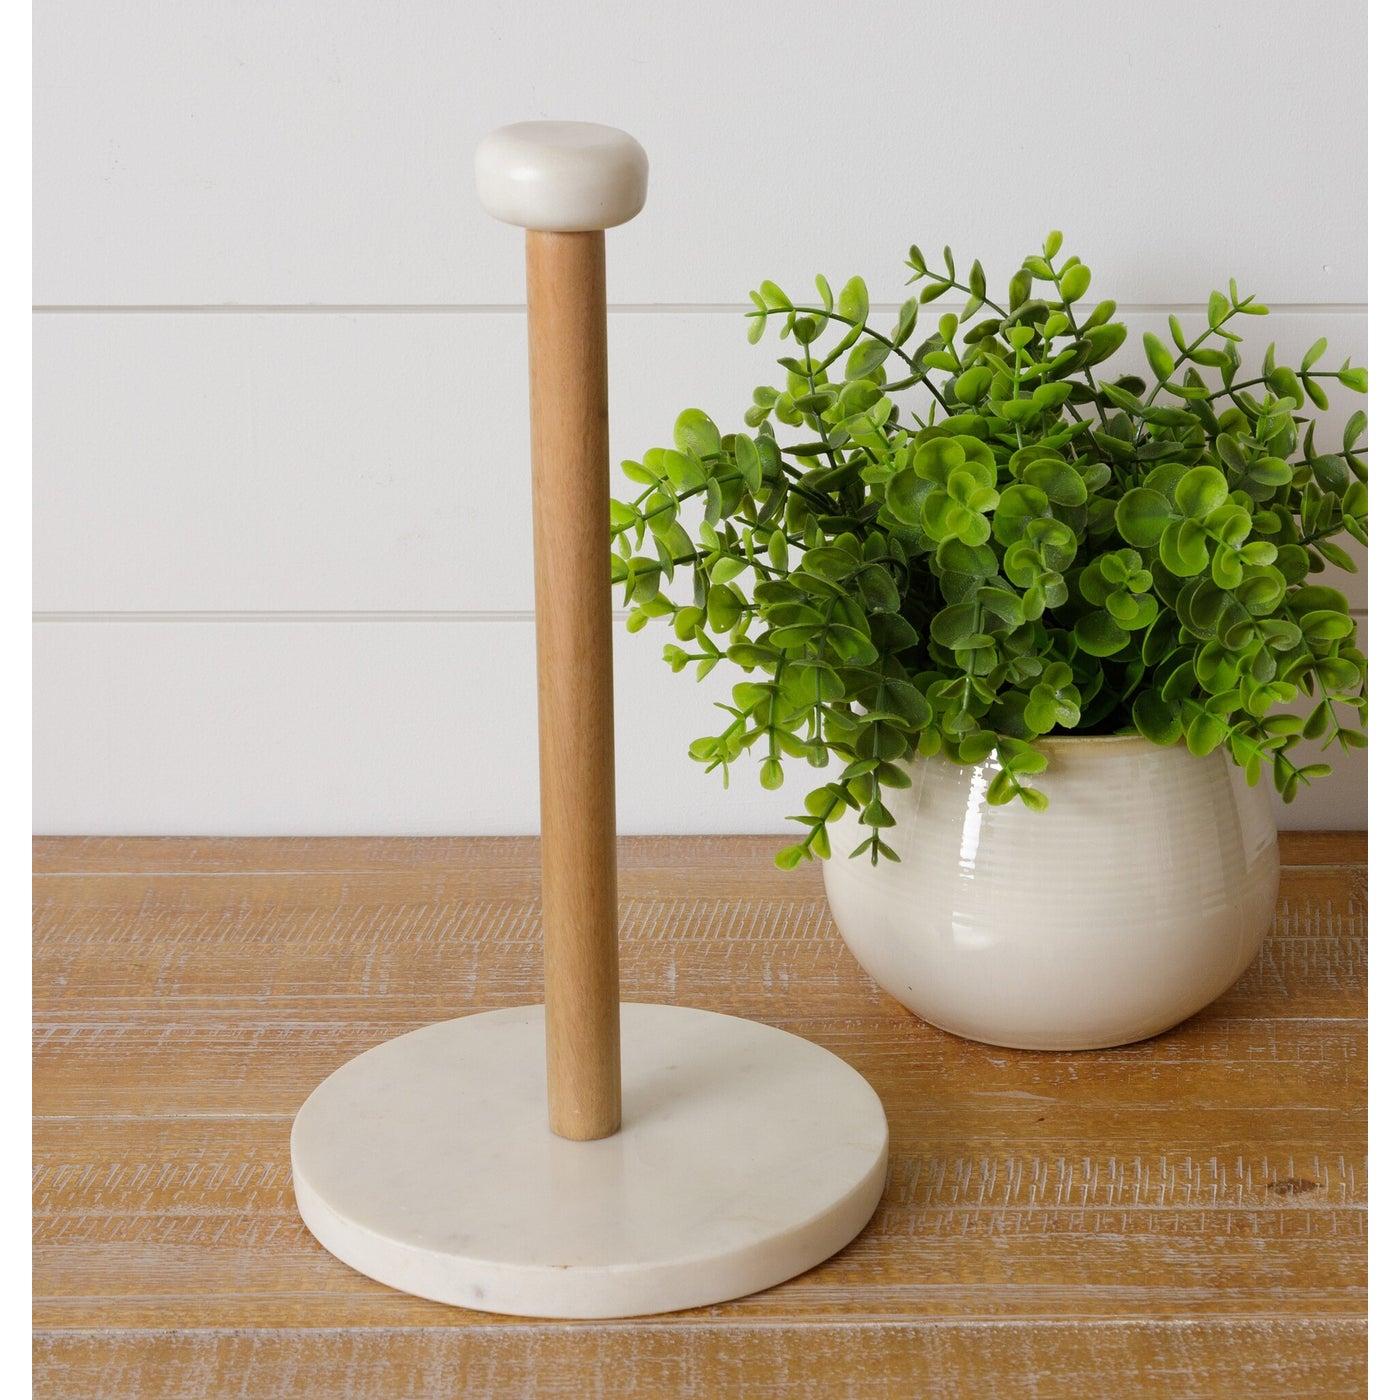 https://cdn.shopify.com/s/files/1/0091/7294/2912/products/Marble_And_Wood_Paper_Towel_Holder_7_1600x.jpg?v=1661693345